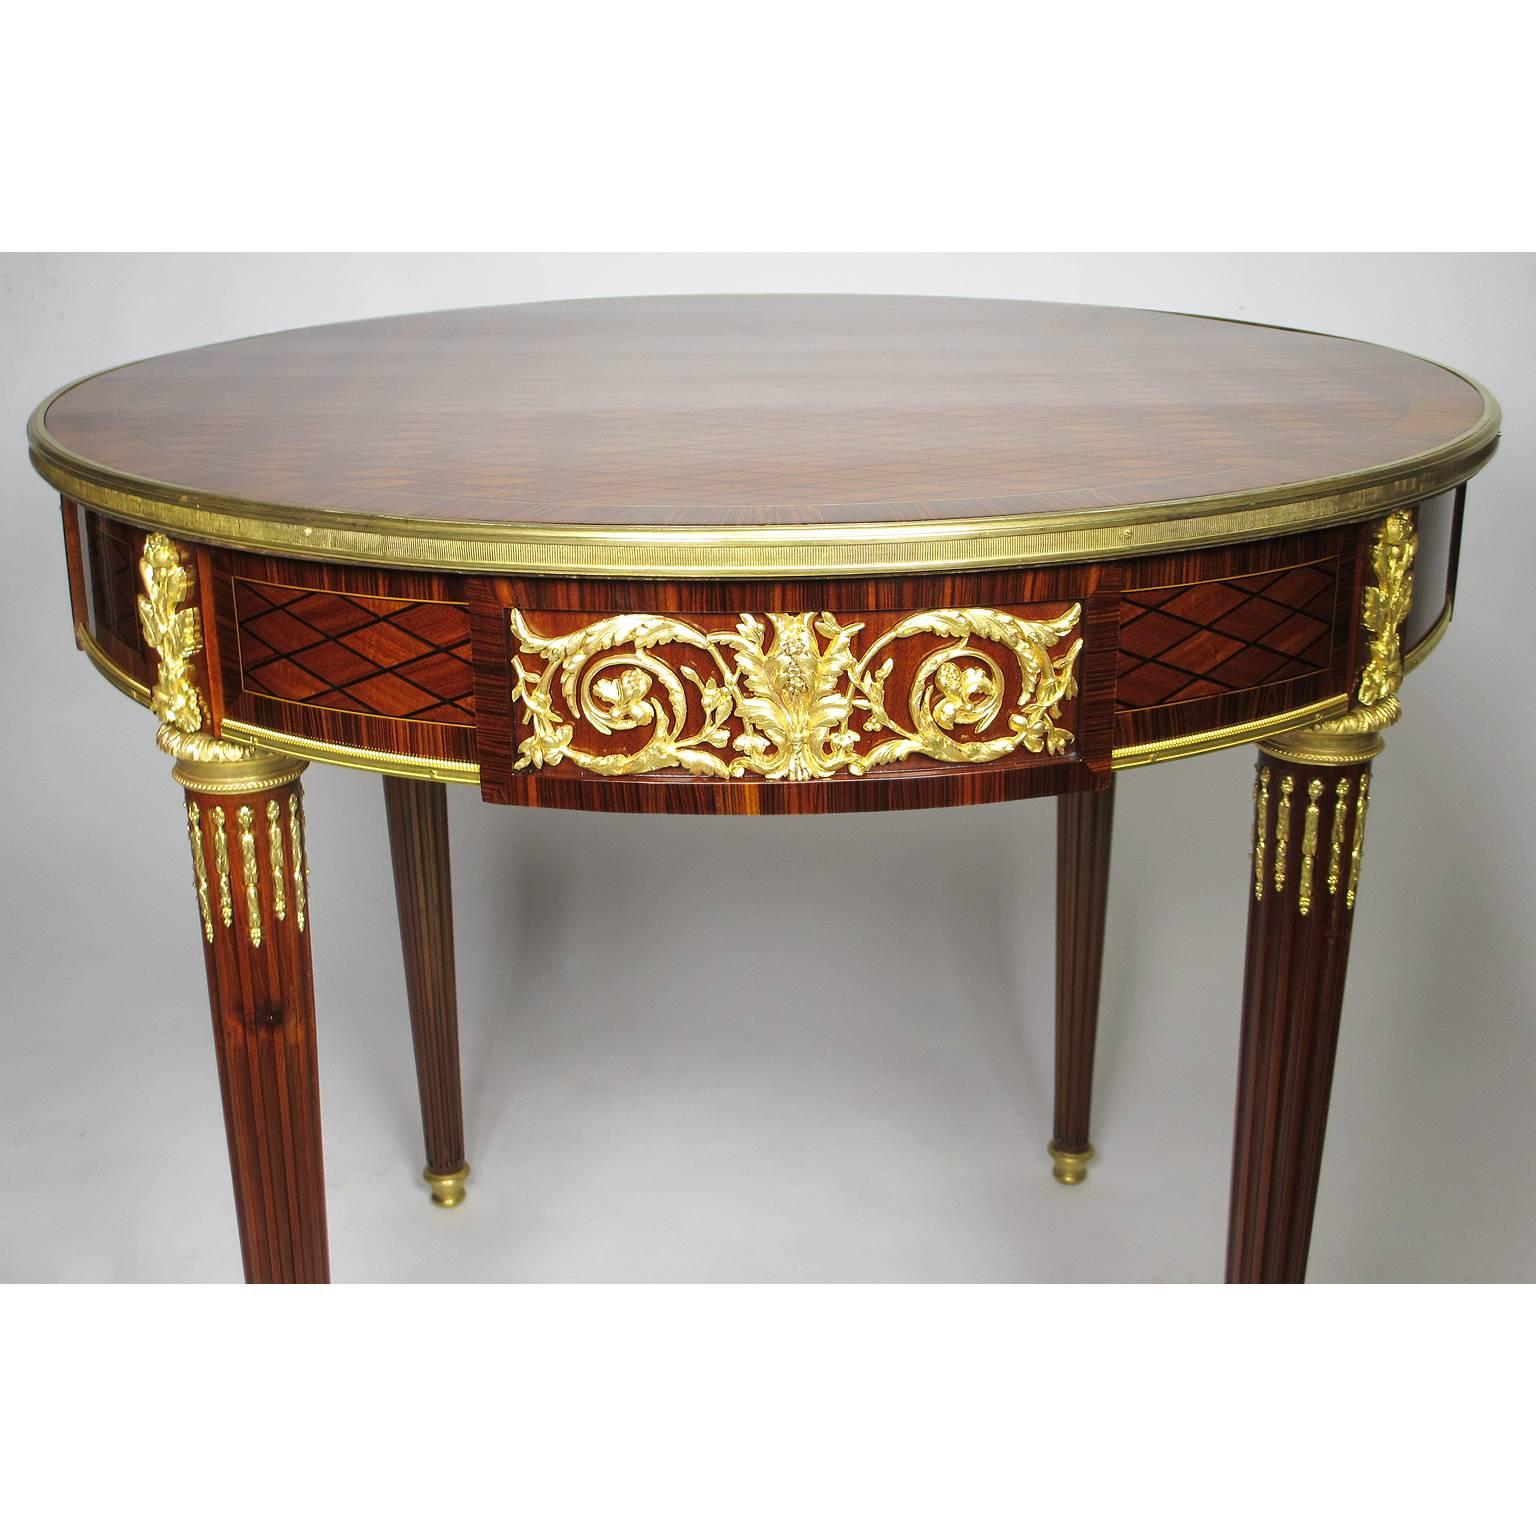 Carved A French 19th-20th Century Louis XVI Style Ormolu-Mounted Guéridon Side Table For Sale